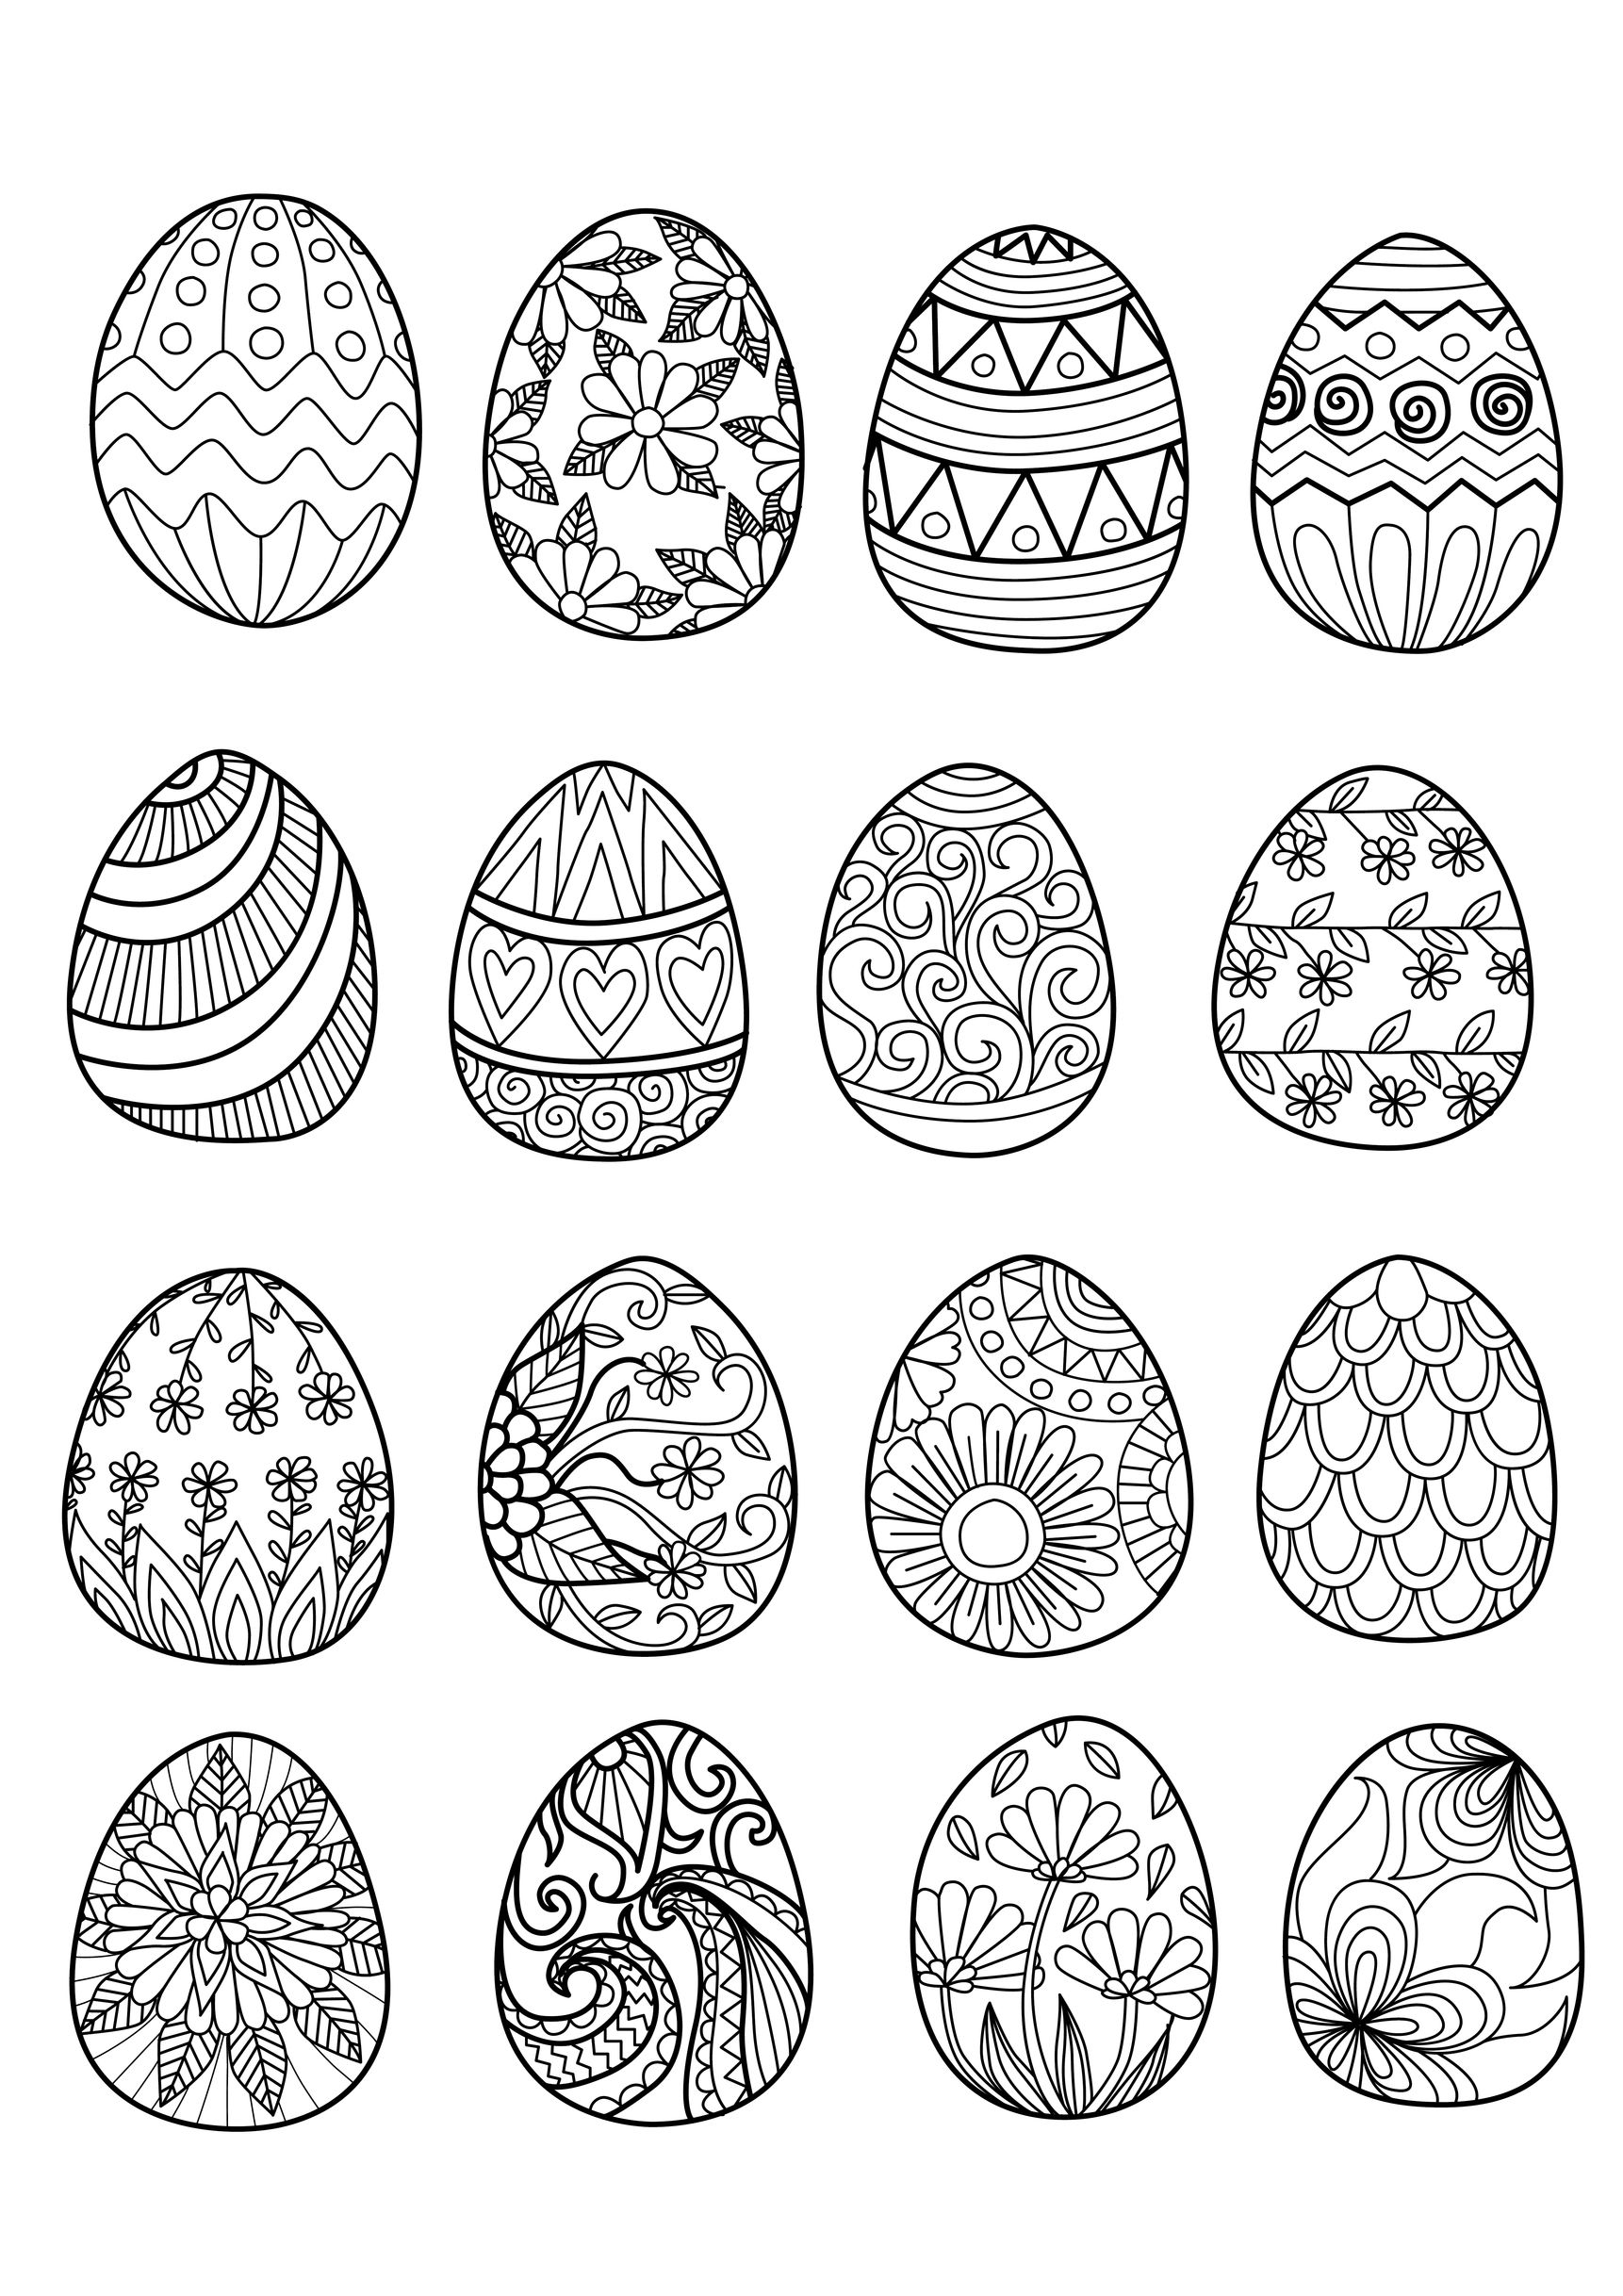 16 Easter eggs to print and color : various styles & ornaments, Artist : Bimdeedee   Source : 123rf